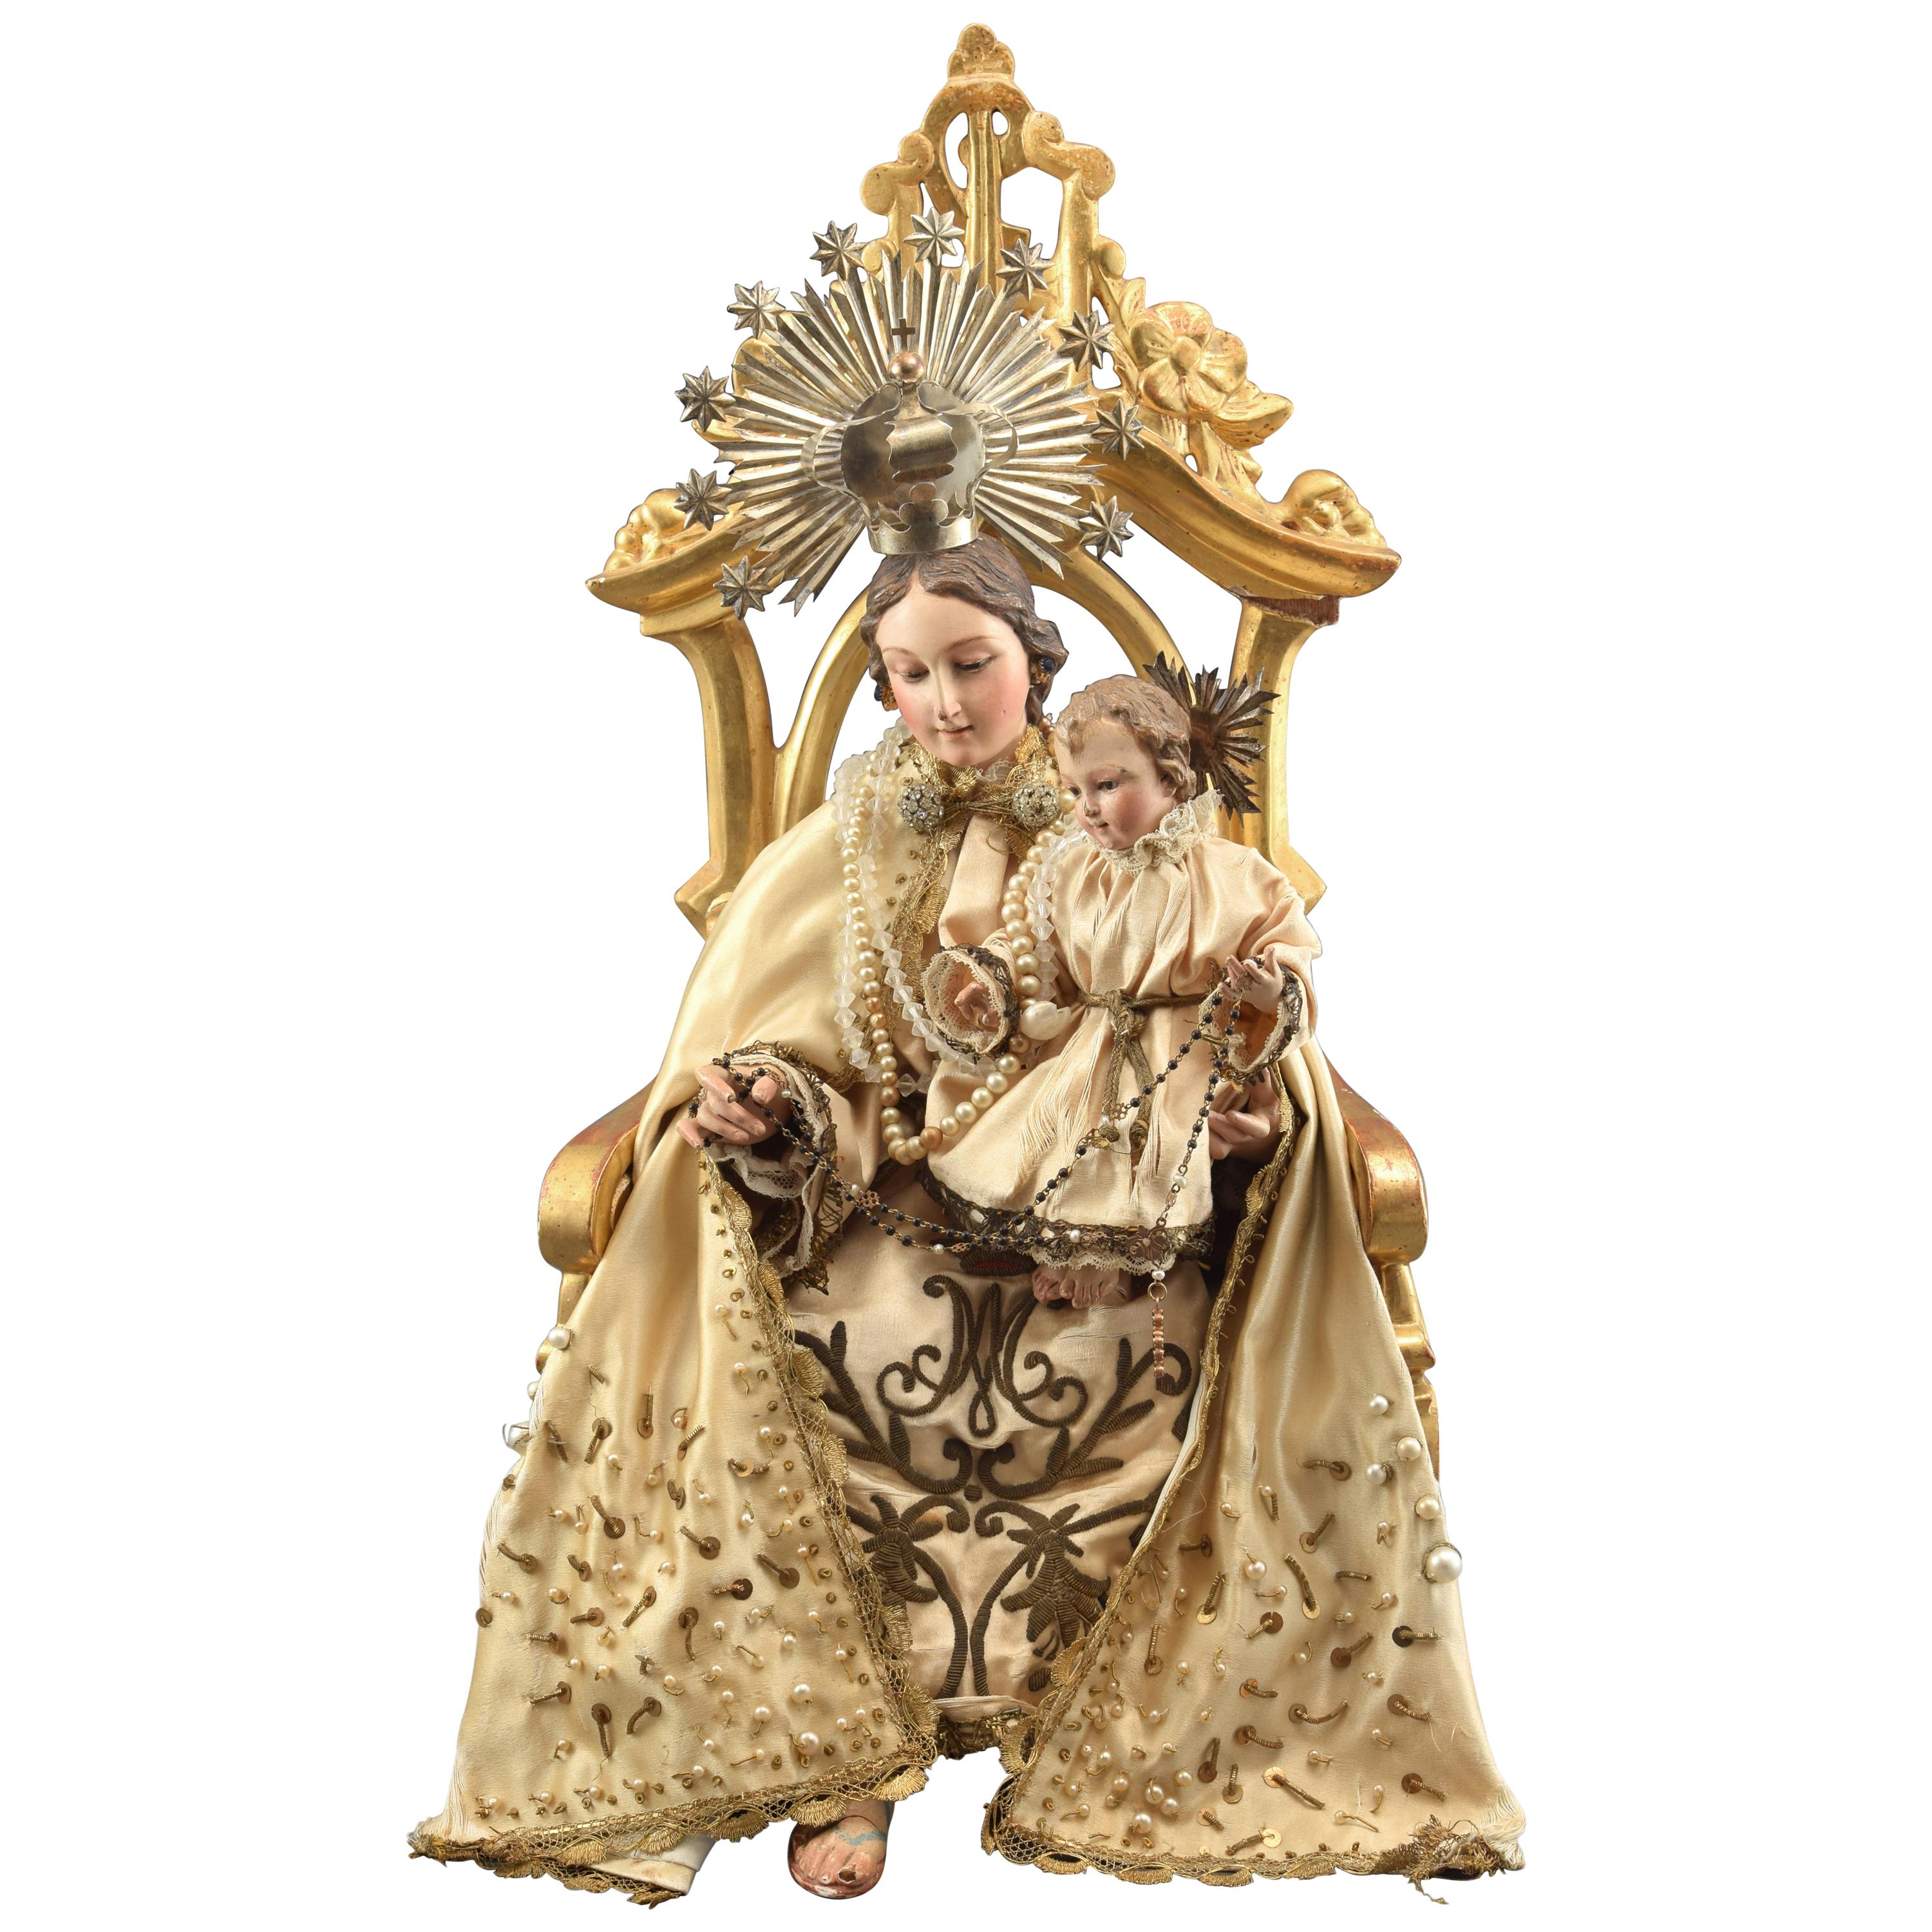 Virgin with Cild on Throne Wood, Metal, Textile, Etc. Spain, 19th Century